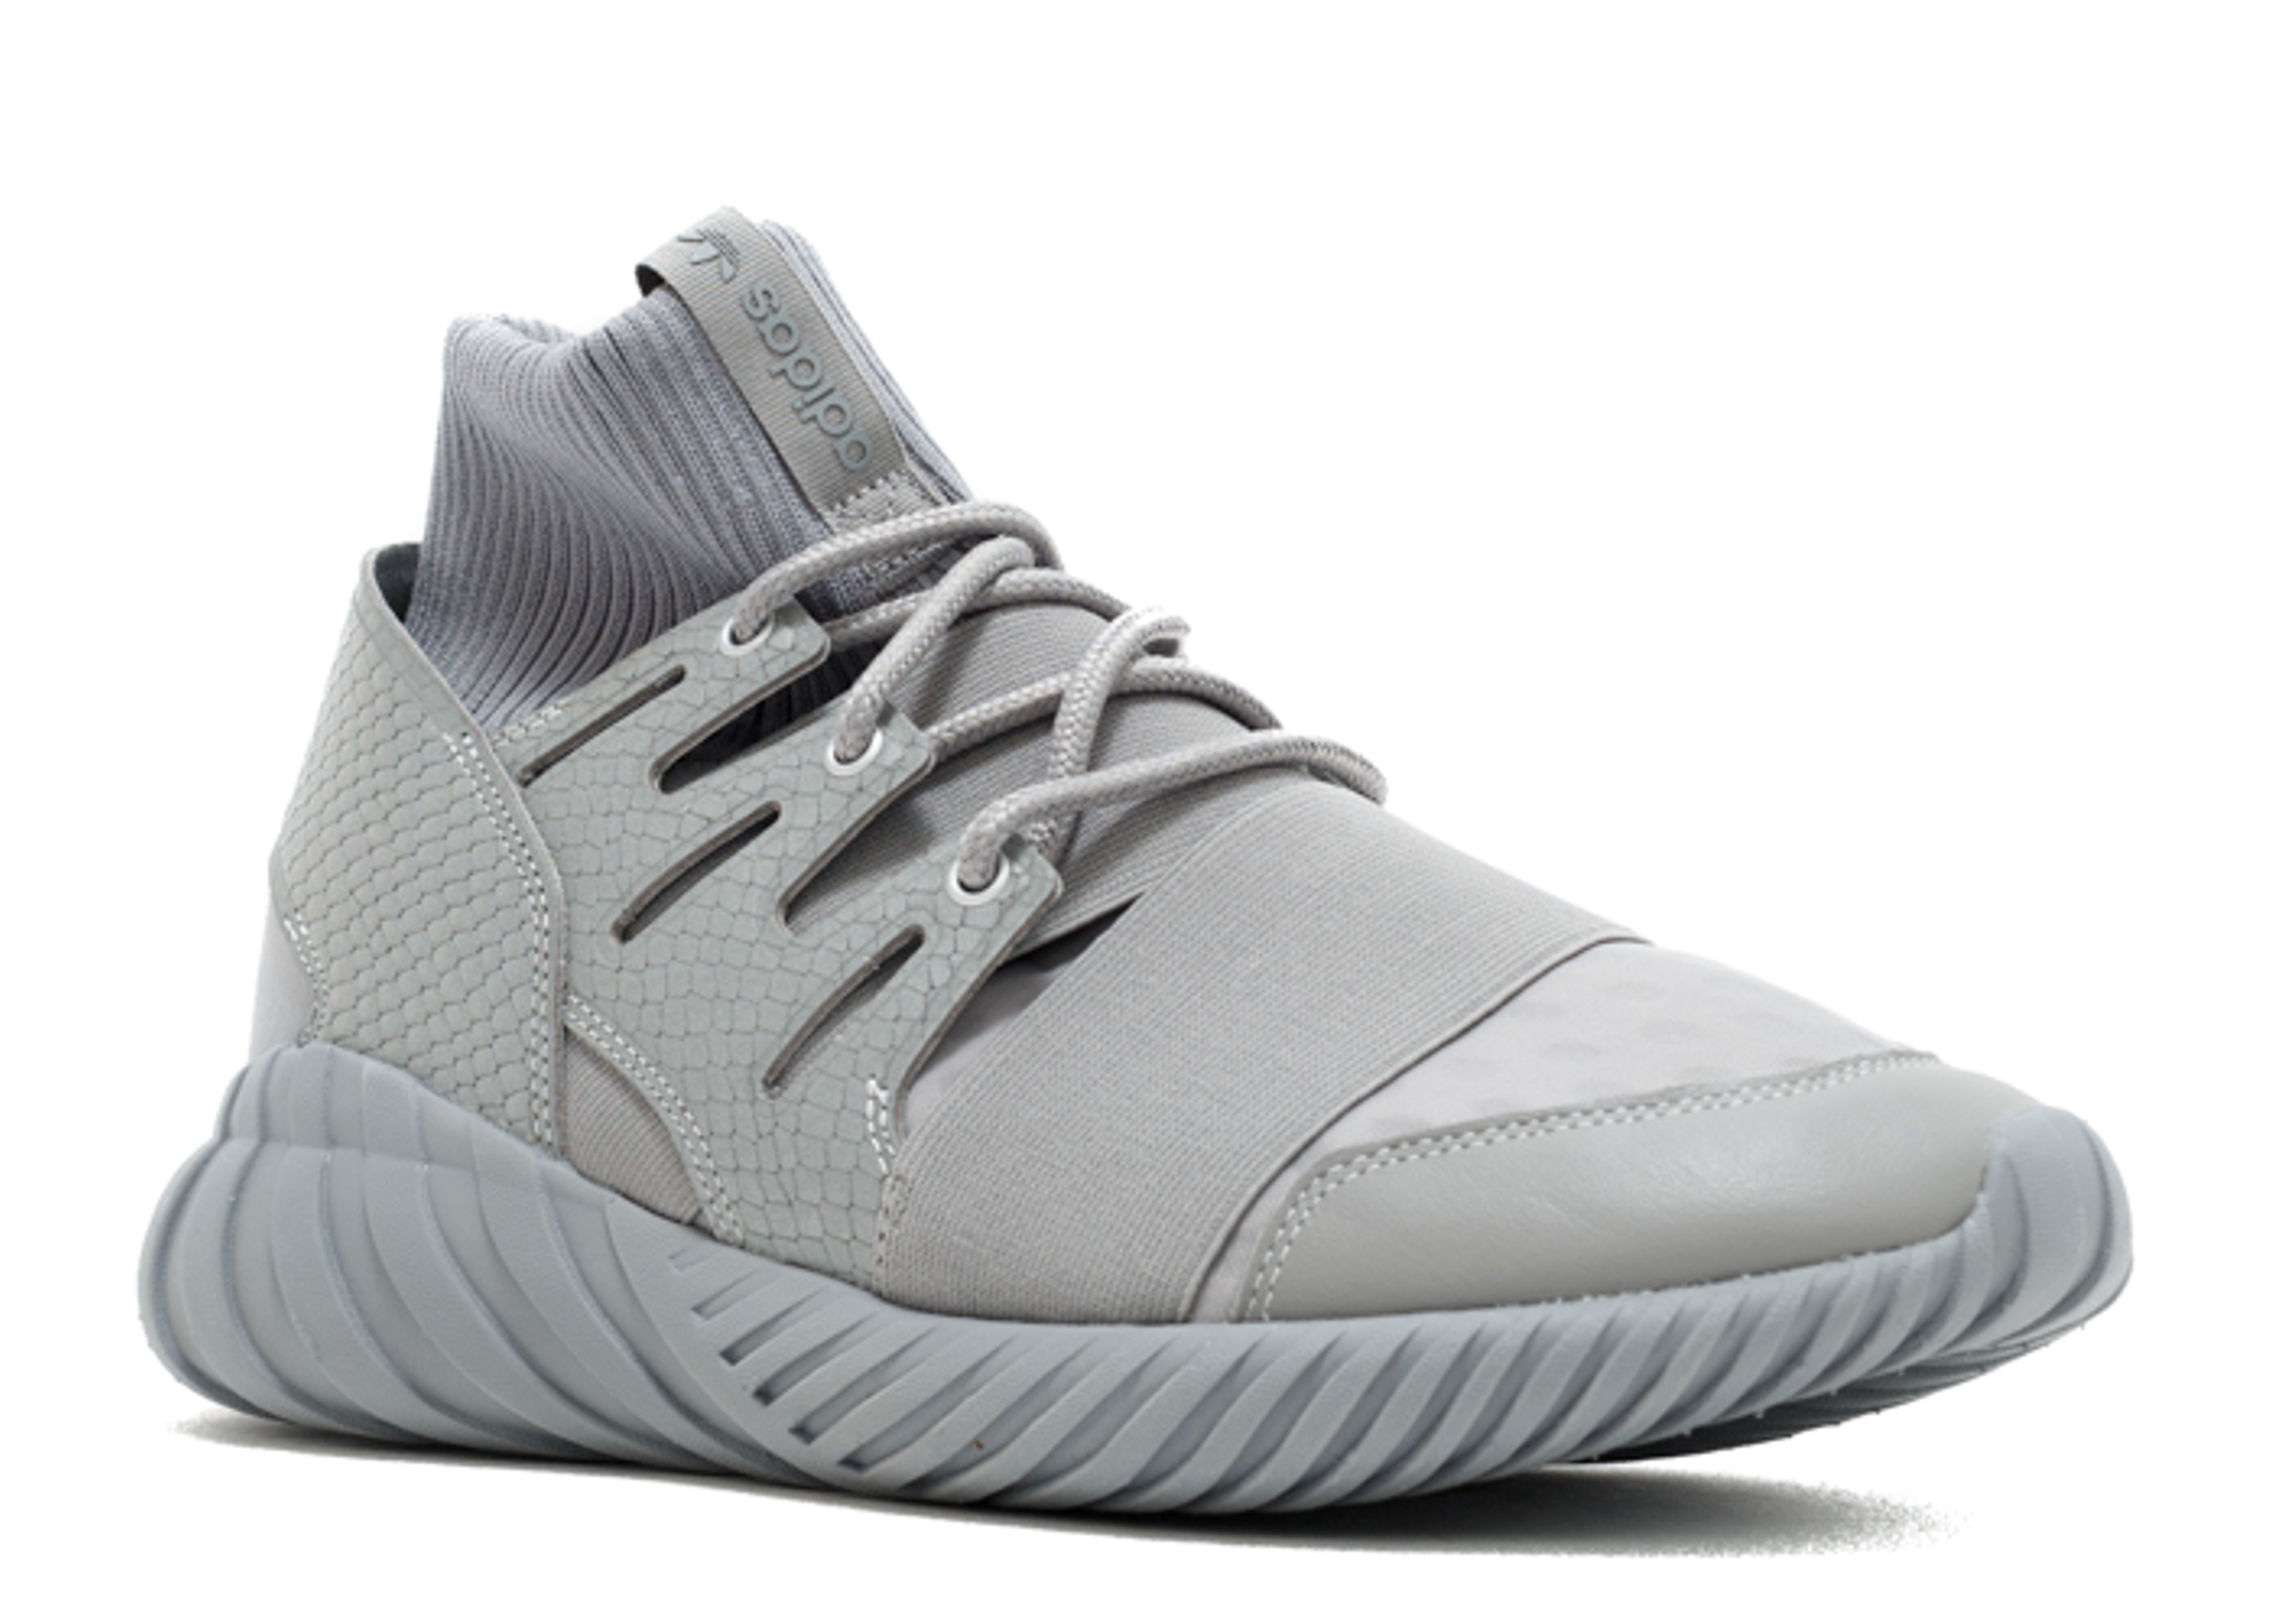 A New Black And White Colorway Of The adidas Tubular Doom